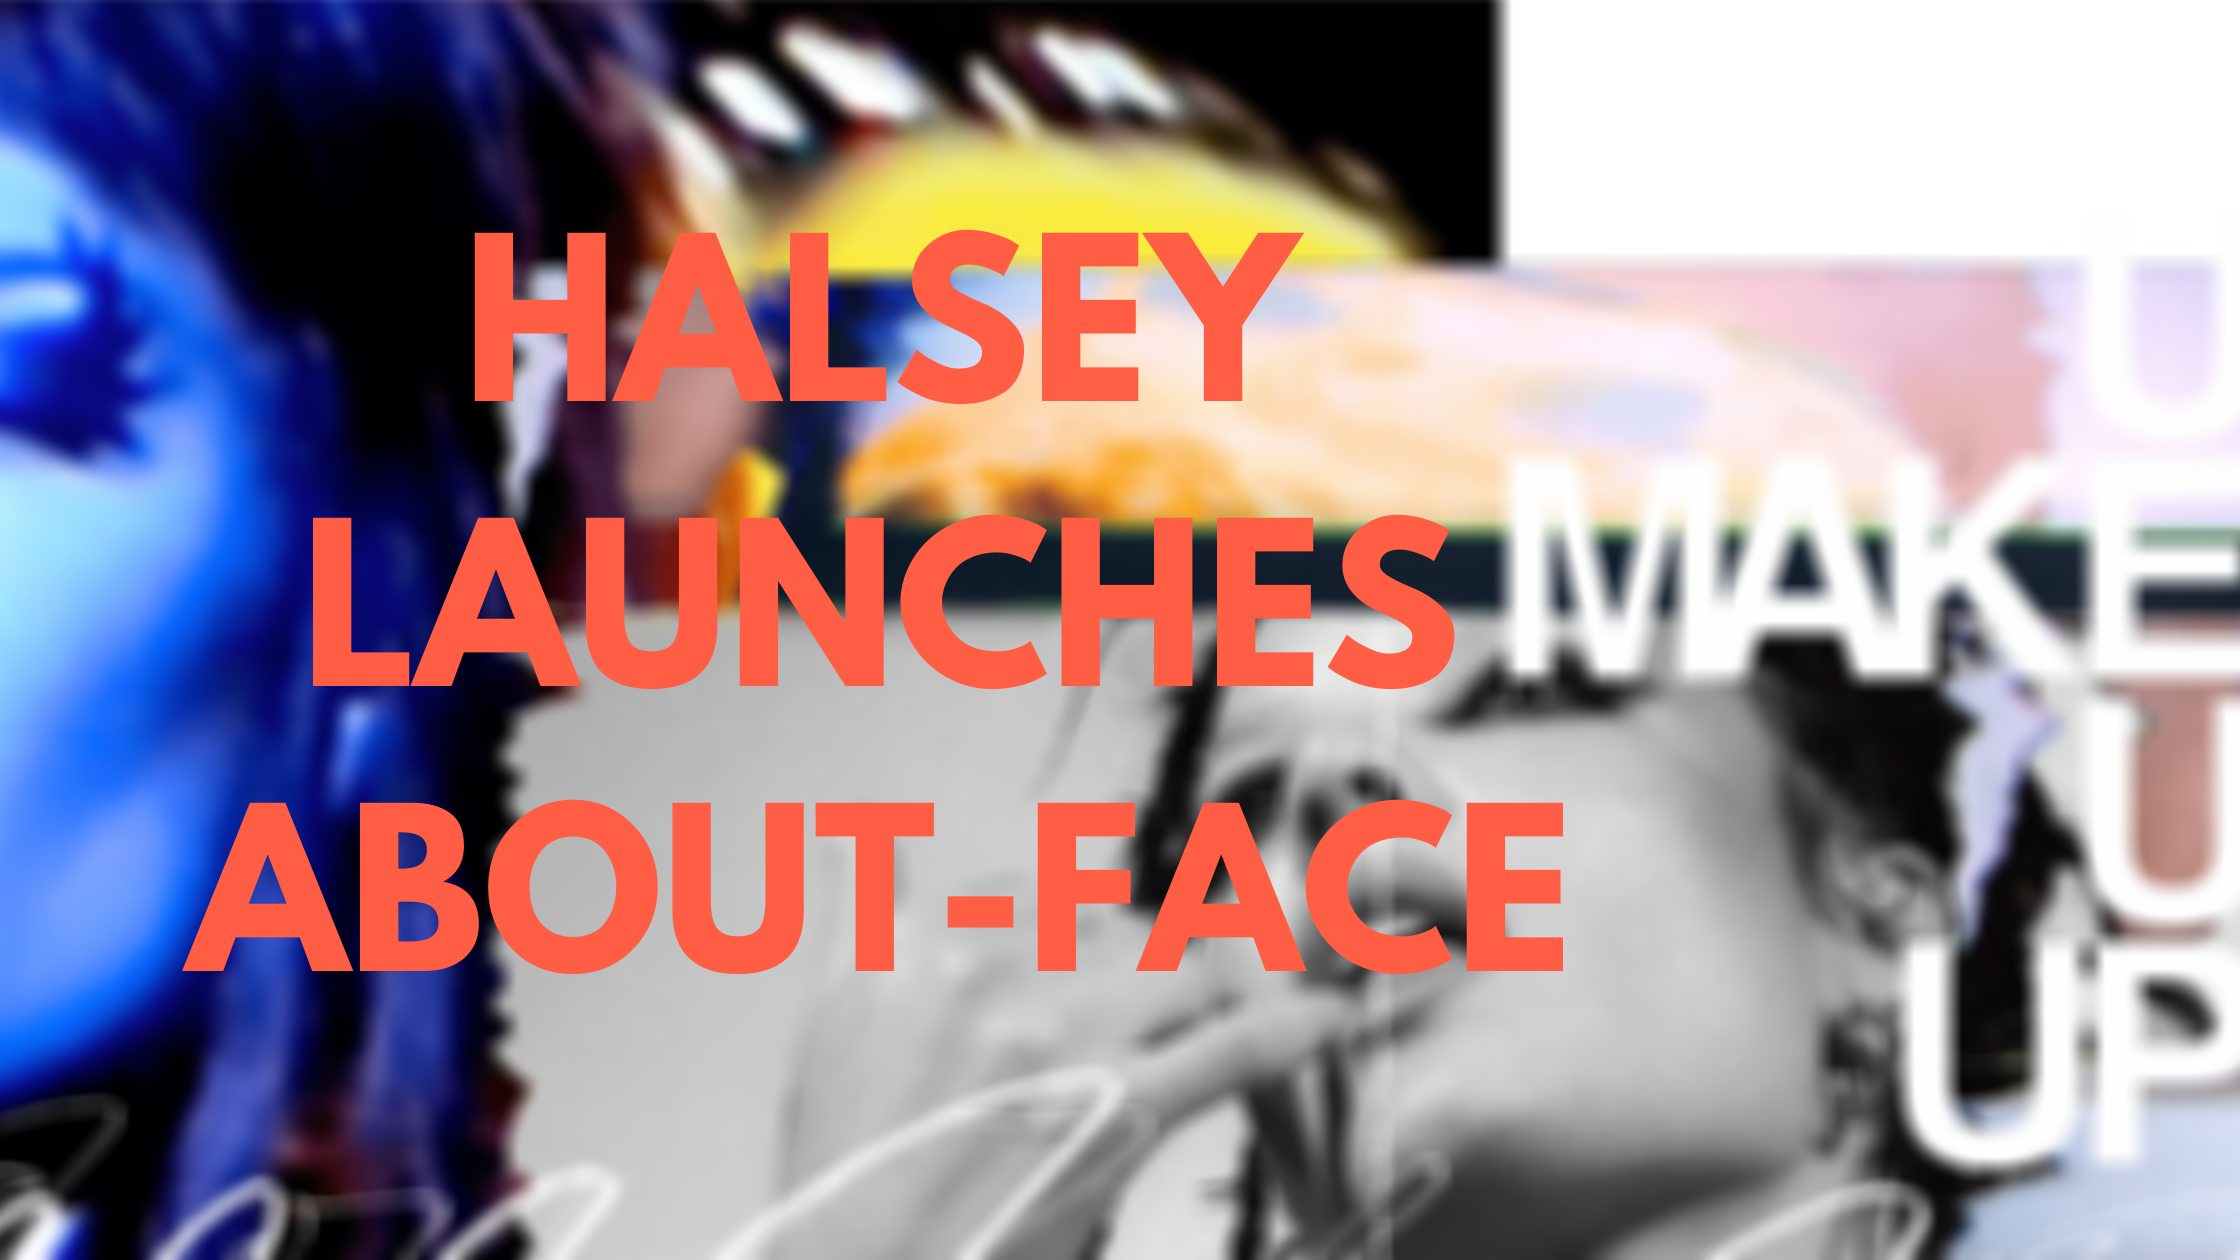 Halsey Launches Her Own Makeup Brand about-face